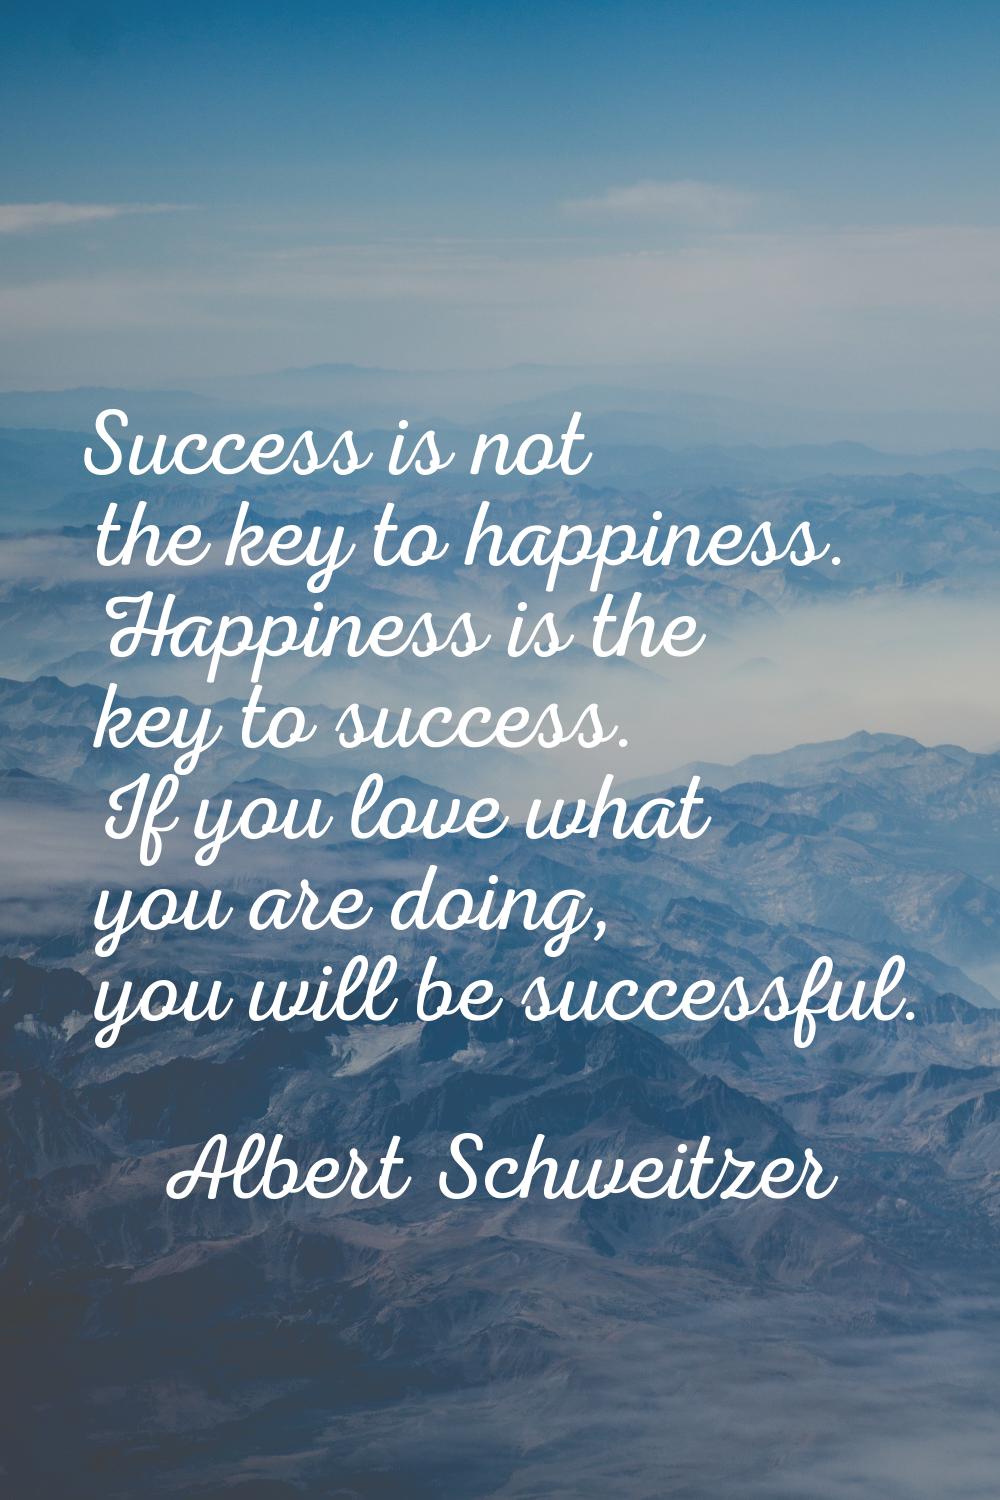 Success is not the key to happiness. Happiness is the key to success. If you love what you are doin